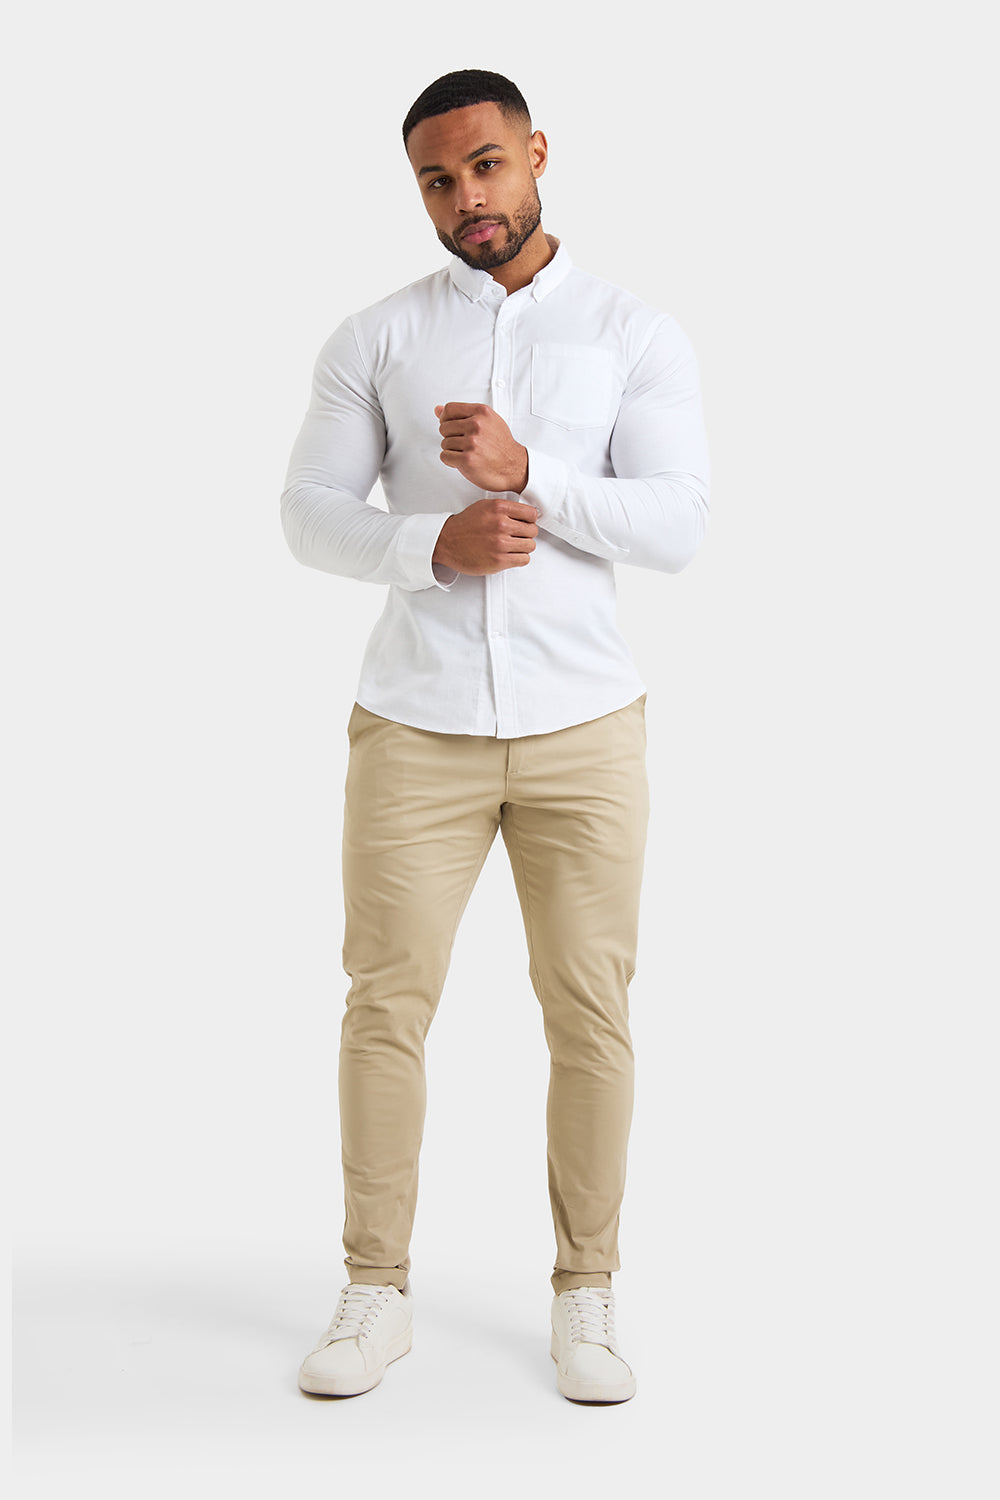 Casual Oxford Shirt in White - TAILORED ATHLETE - ROW